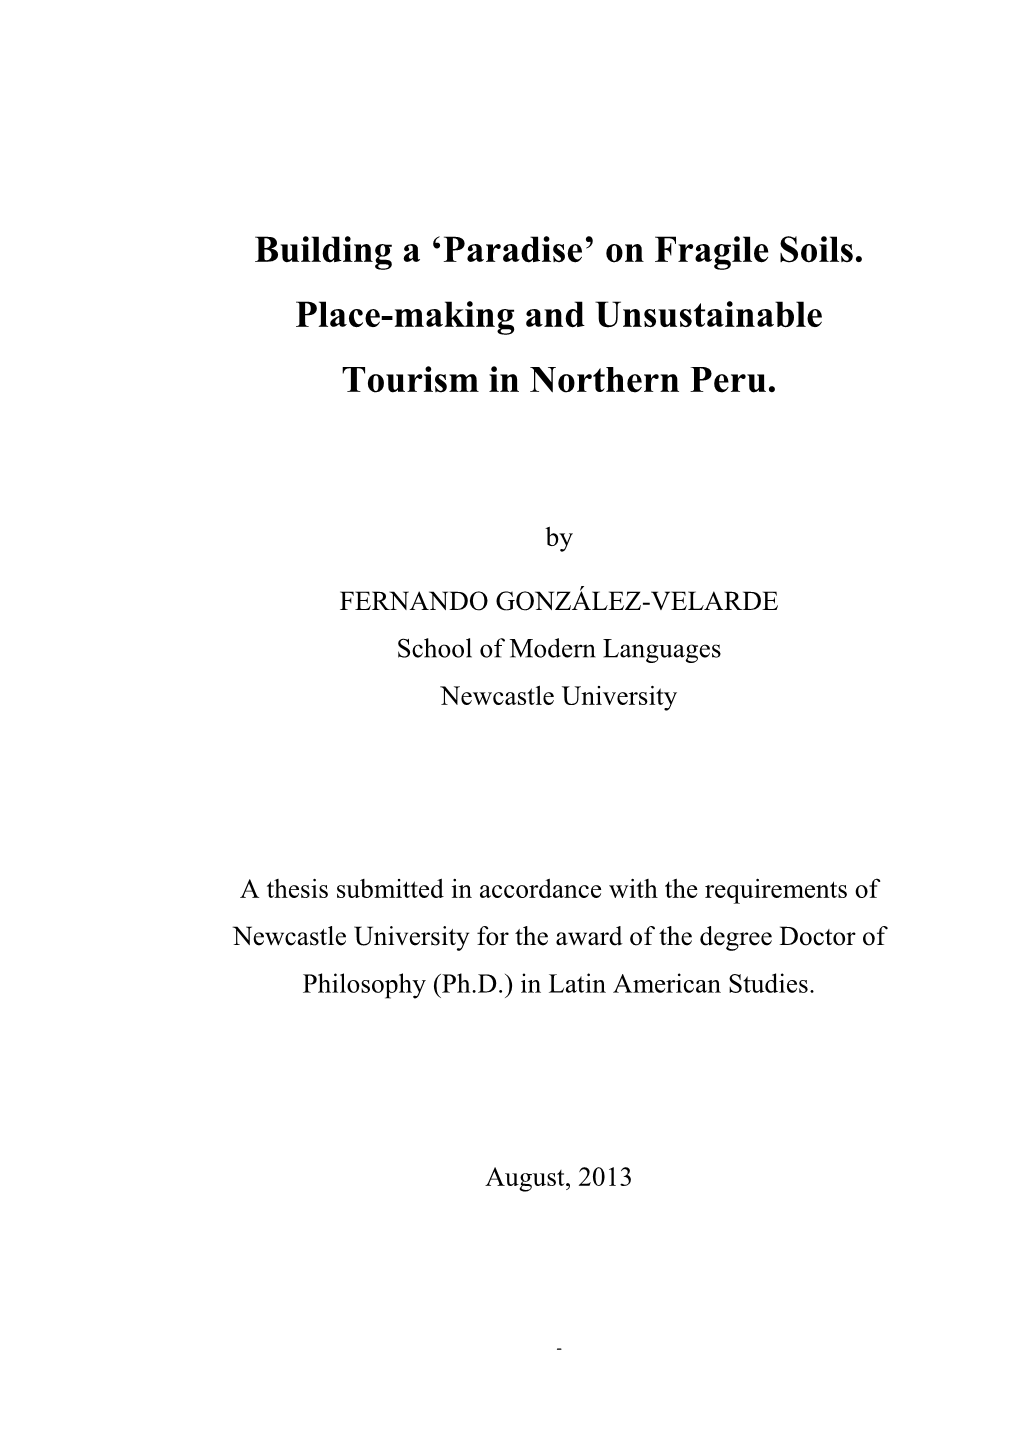 On Fragile Soils. Place-Making and Unsustainable Tourism in Northern Peru